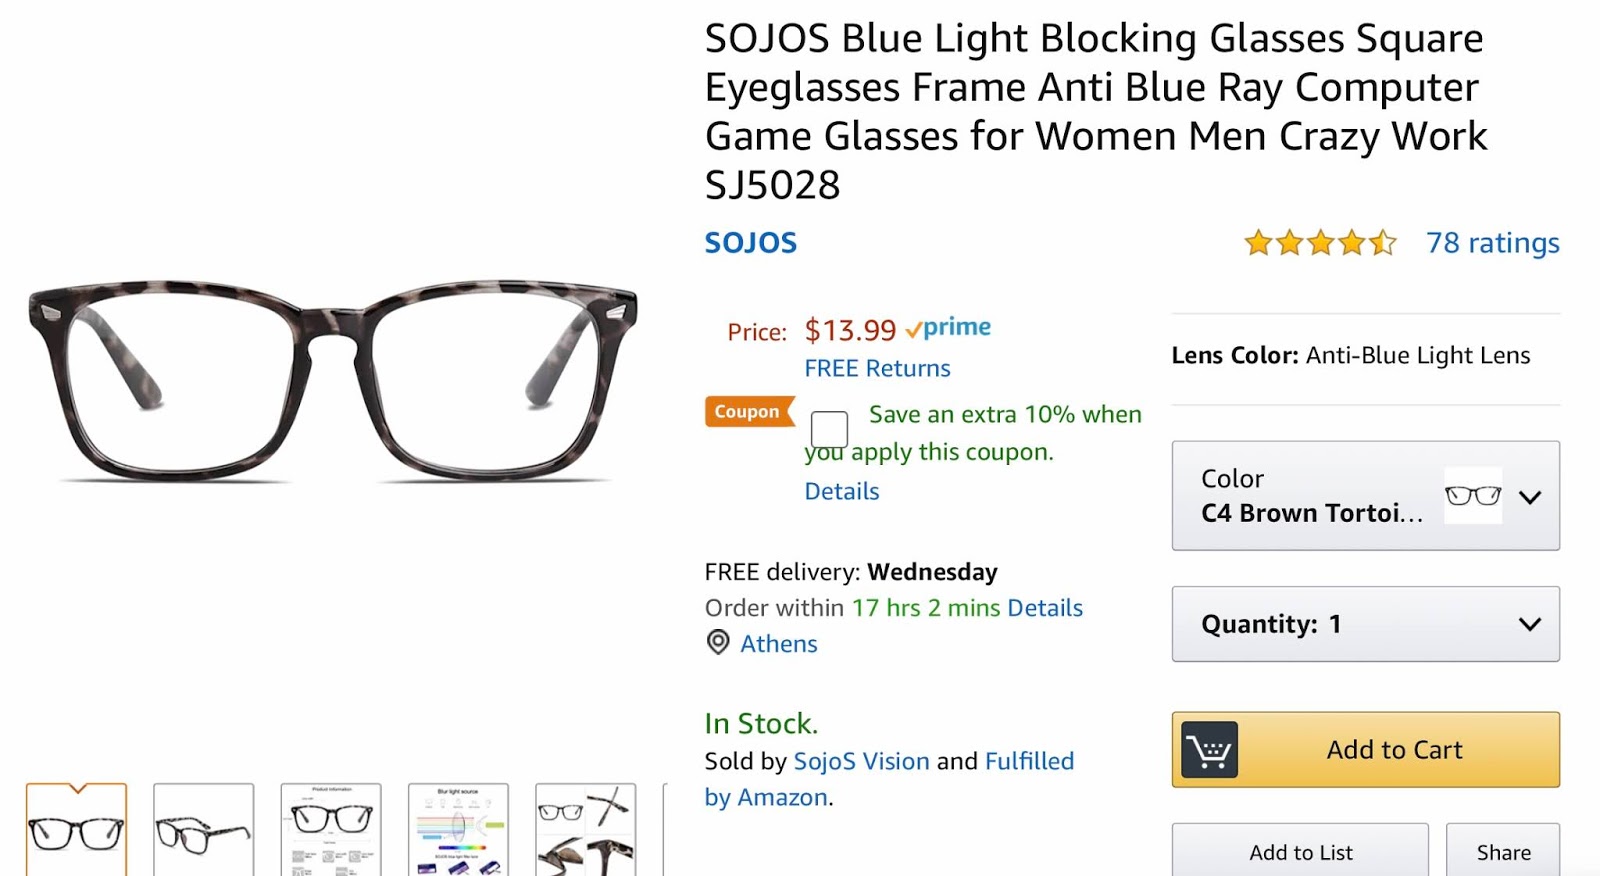 Why You Need Blue Light Blocking Glasses... SOJOS GLASSES